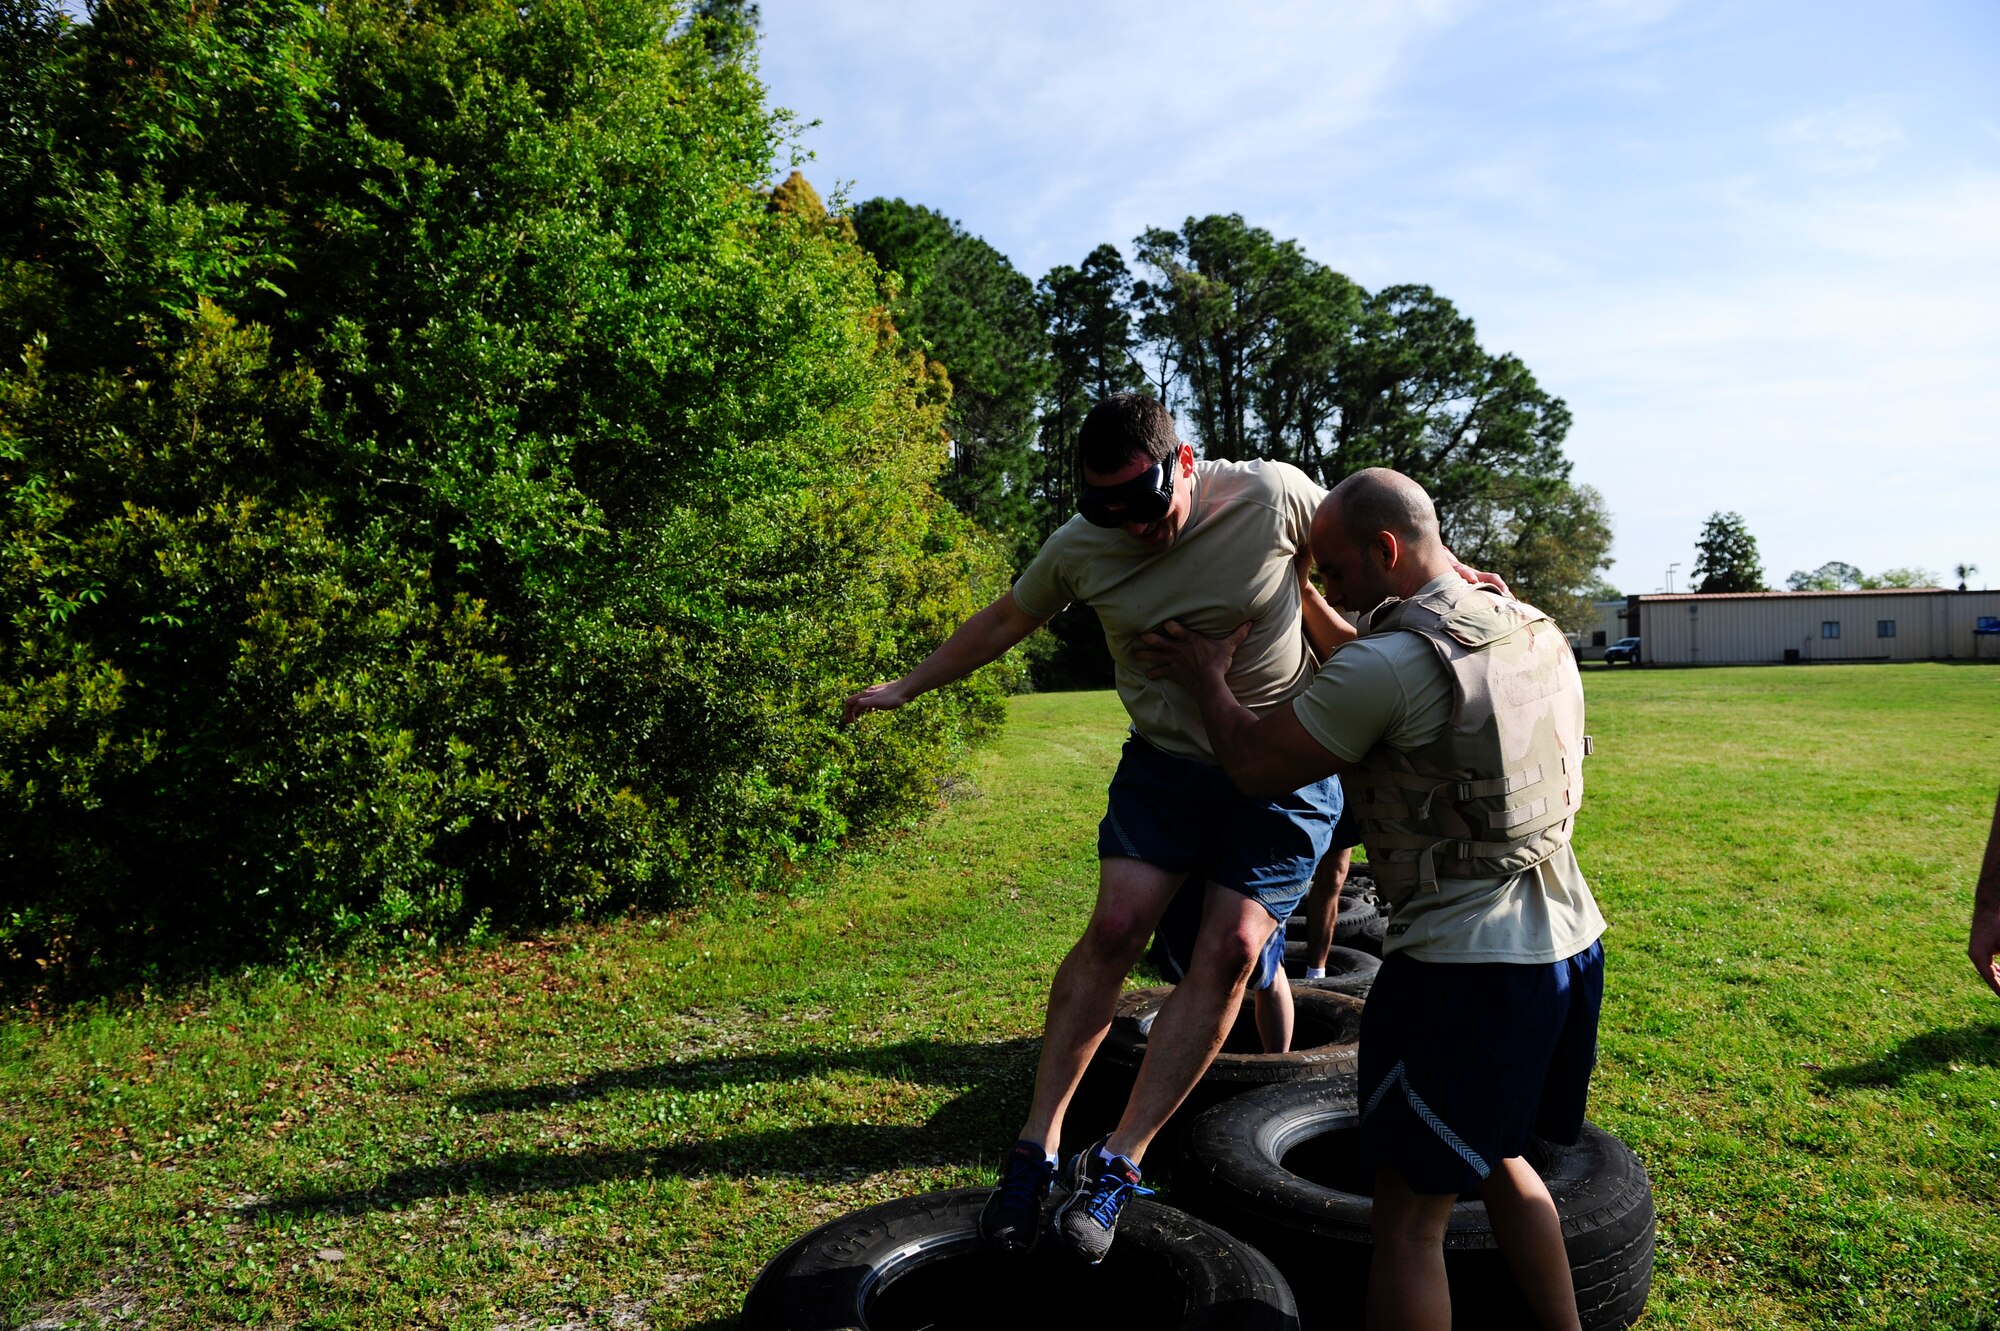 Airmen from the 1st Special Operations Security Forces Squadron participate in the CLEAR Challenge Obstacle Course on Hurlburt Field, Fla., April 11, 2014. The courses represented things that one may encounter in their personal and work life. (U.S. Air Force photo/Senior Airman Krystal M. Garrett)